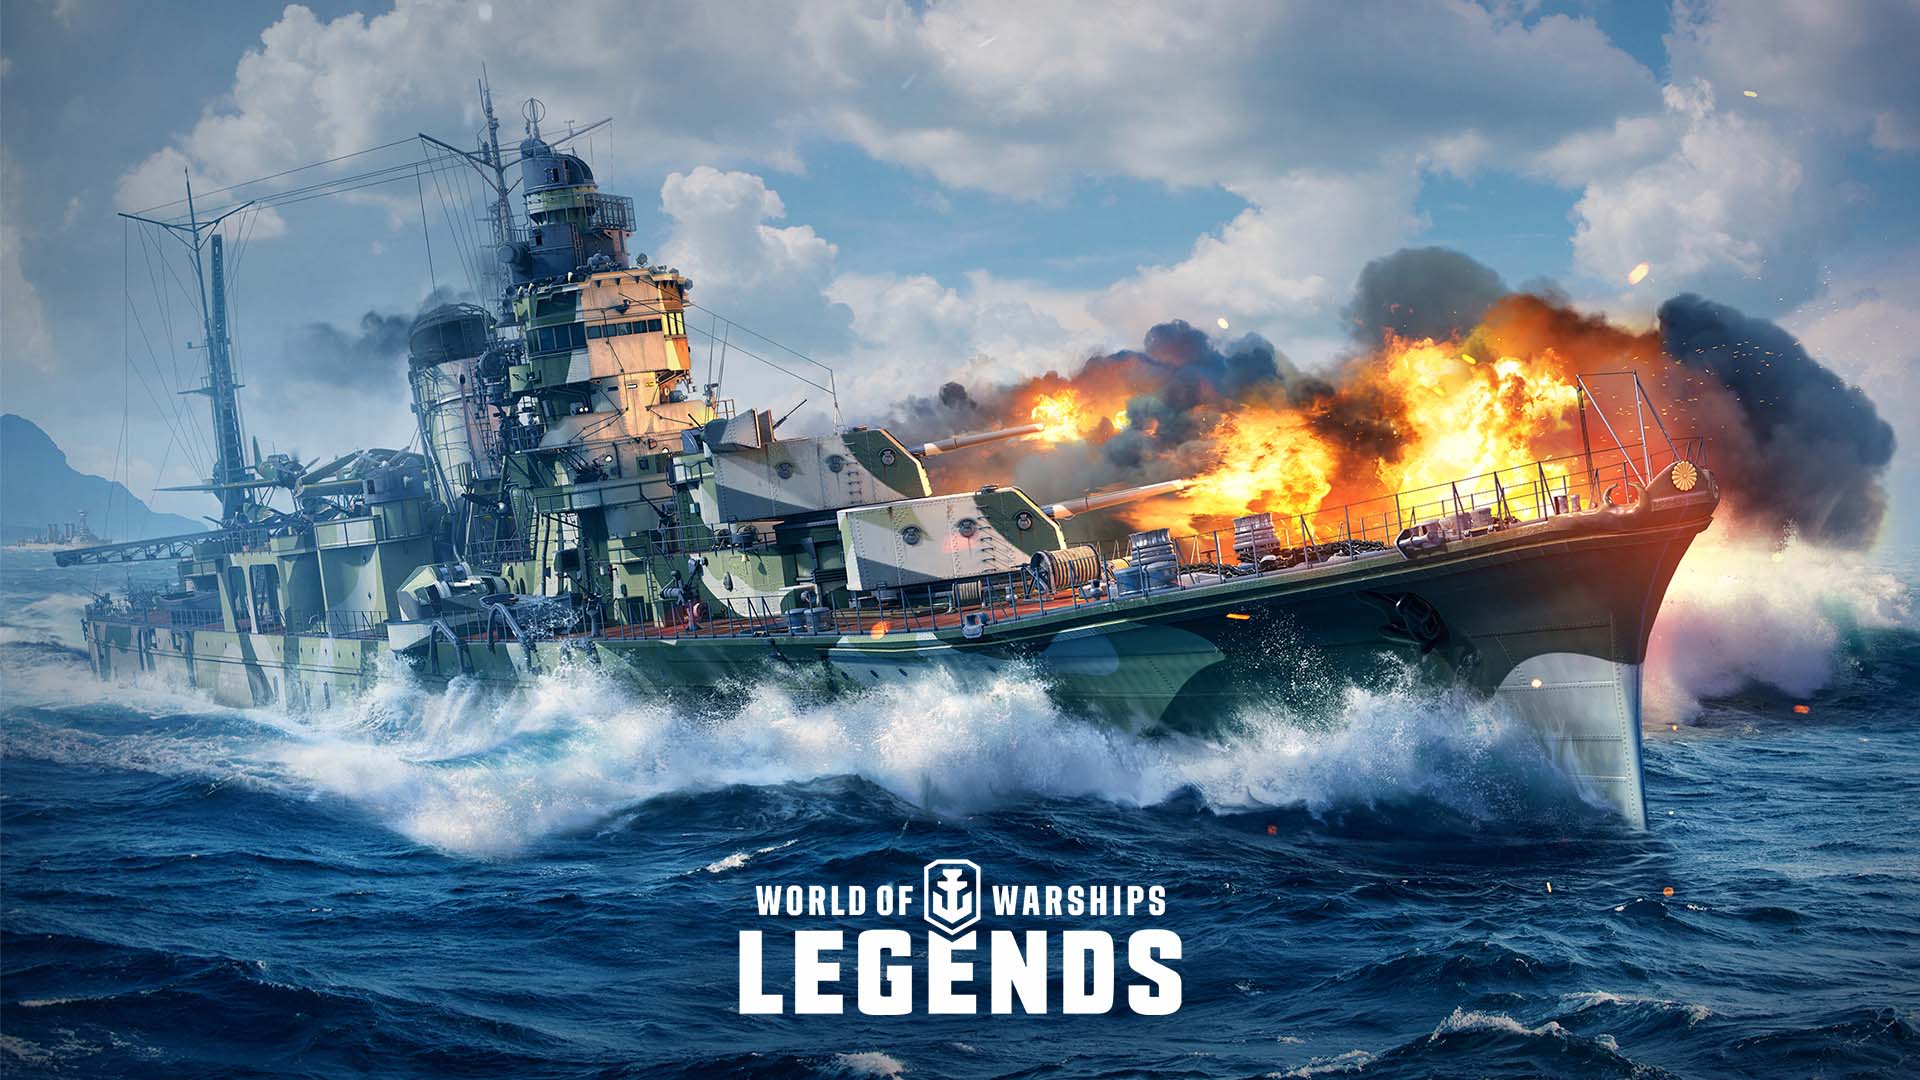 World Of Warships Legends アップデートに伴う年末年始限定イベントの新情報を公開